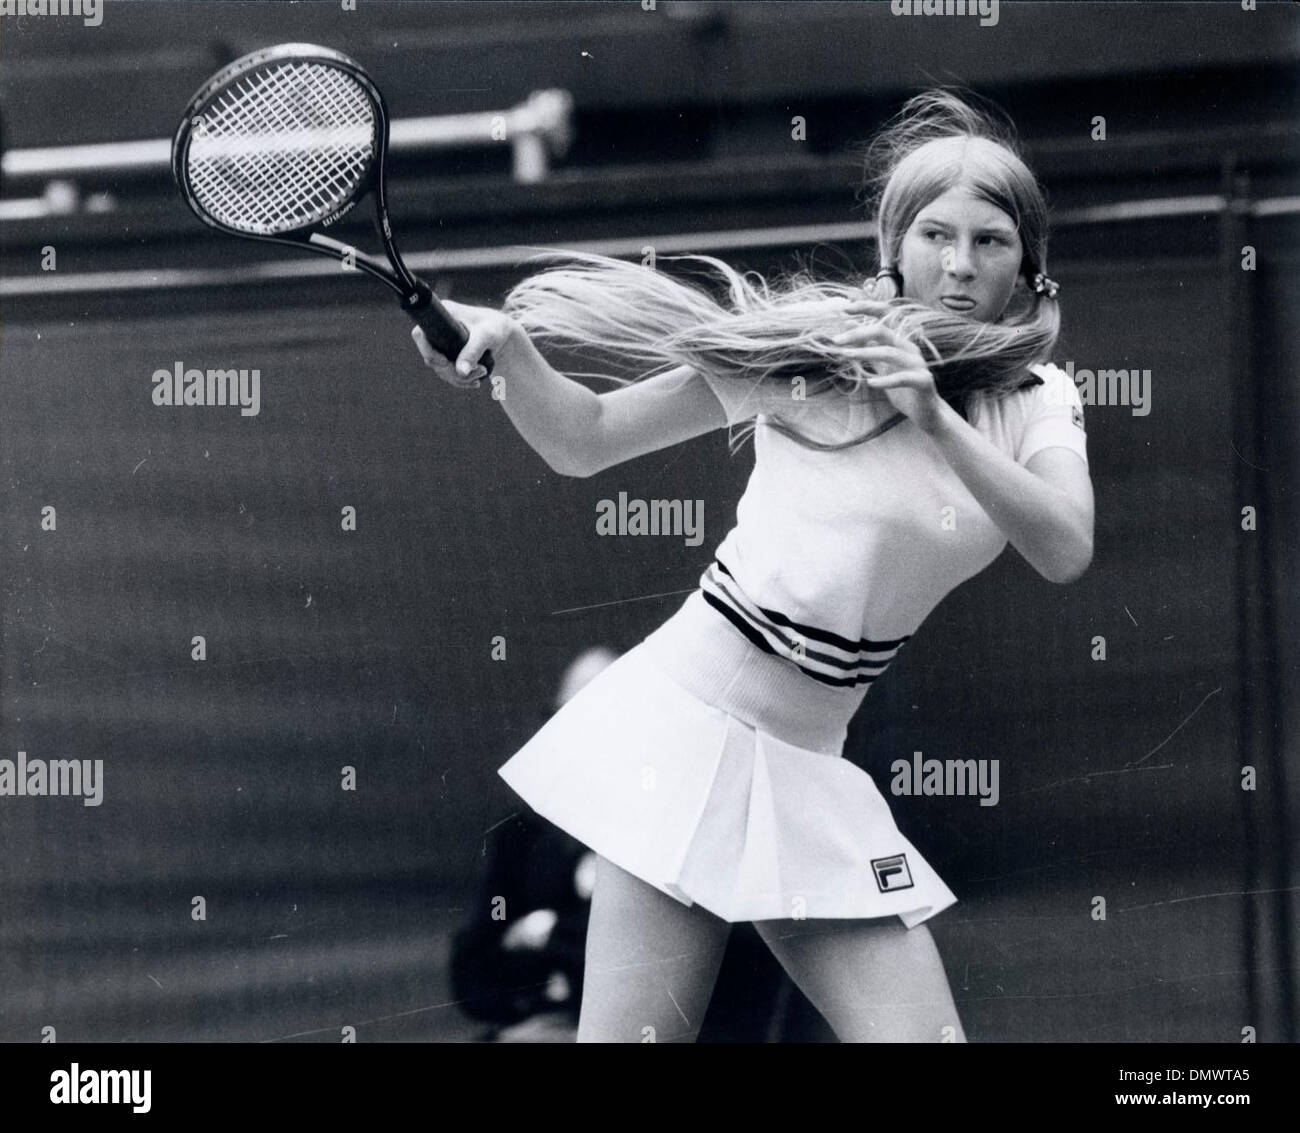 Jun 30, 1980 - London, England, United Kingdom - ANDREA JAEGER in action against Britain's Virginia Wade at Wimbledon. She would go on to beat Wade and become the youngest quarterfinalist in the history of the tournament. (Credit Image: © KEYSTONE Pictures/ZUMAPRESS.com) Stock Photo